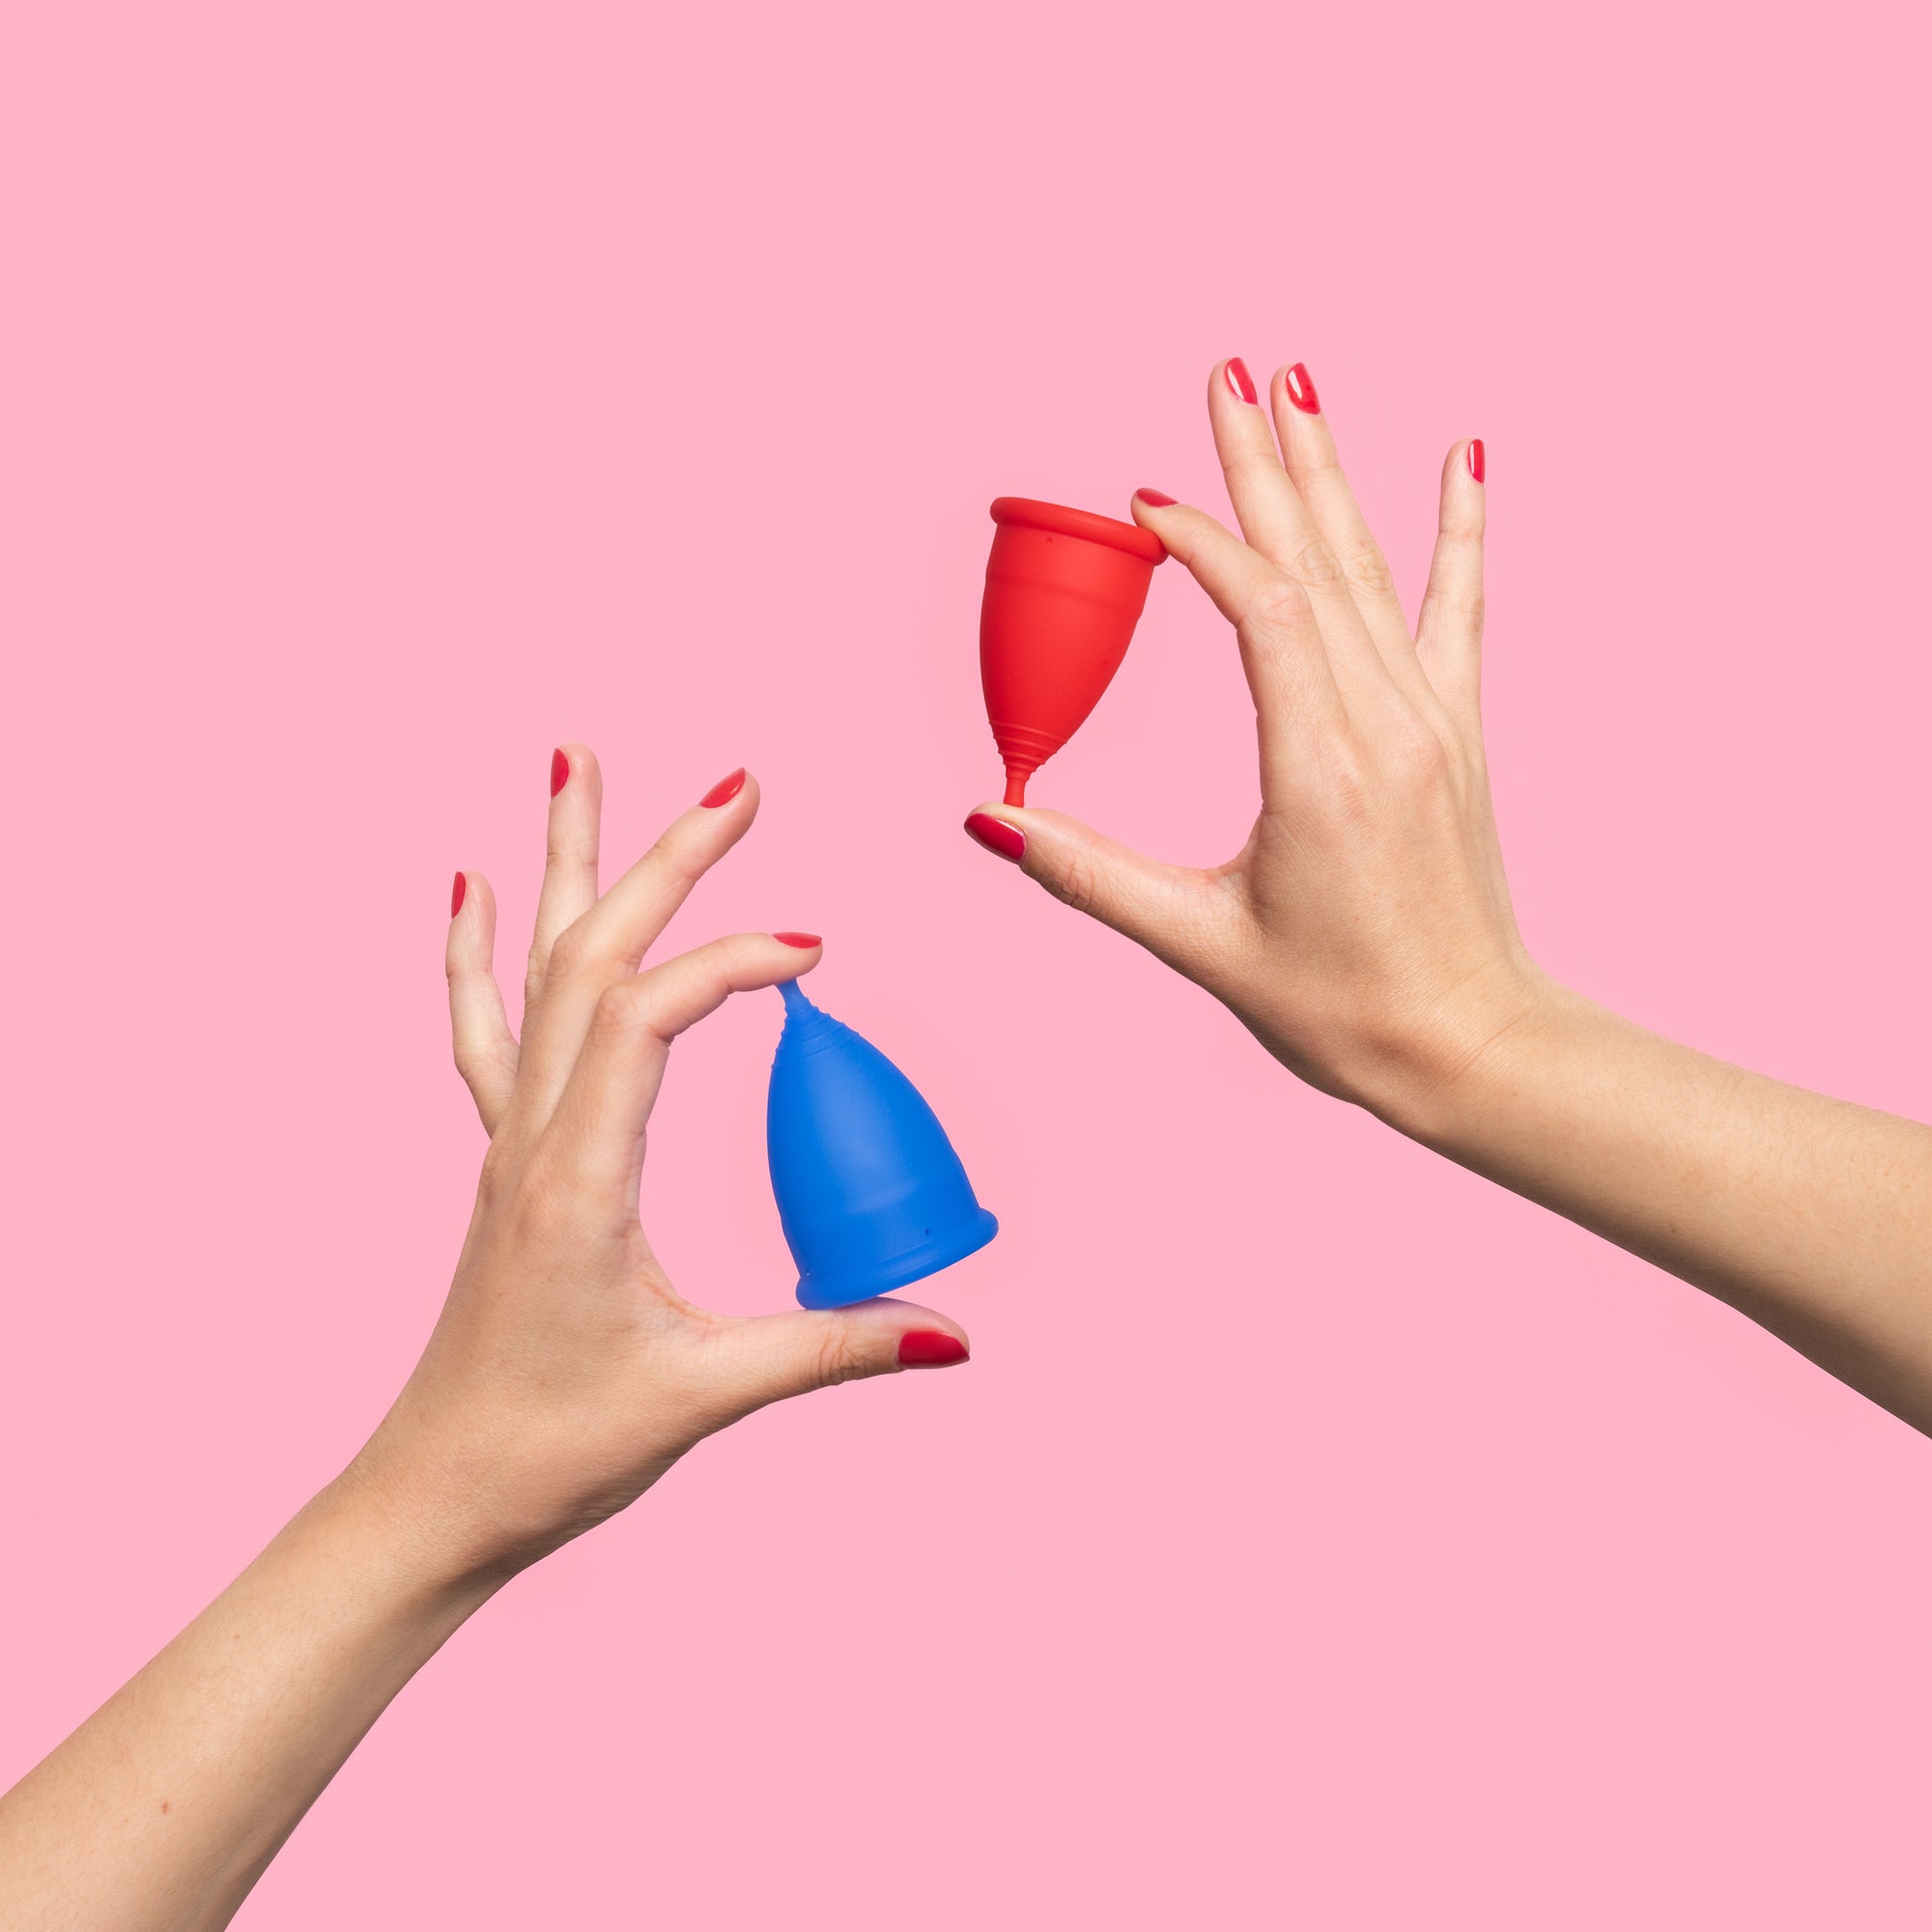 MENSTRUAL CUP STUCK? HERE'S HOW TO GET IT OUT.